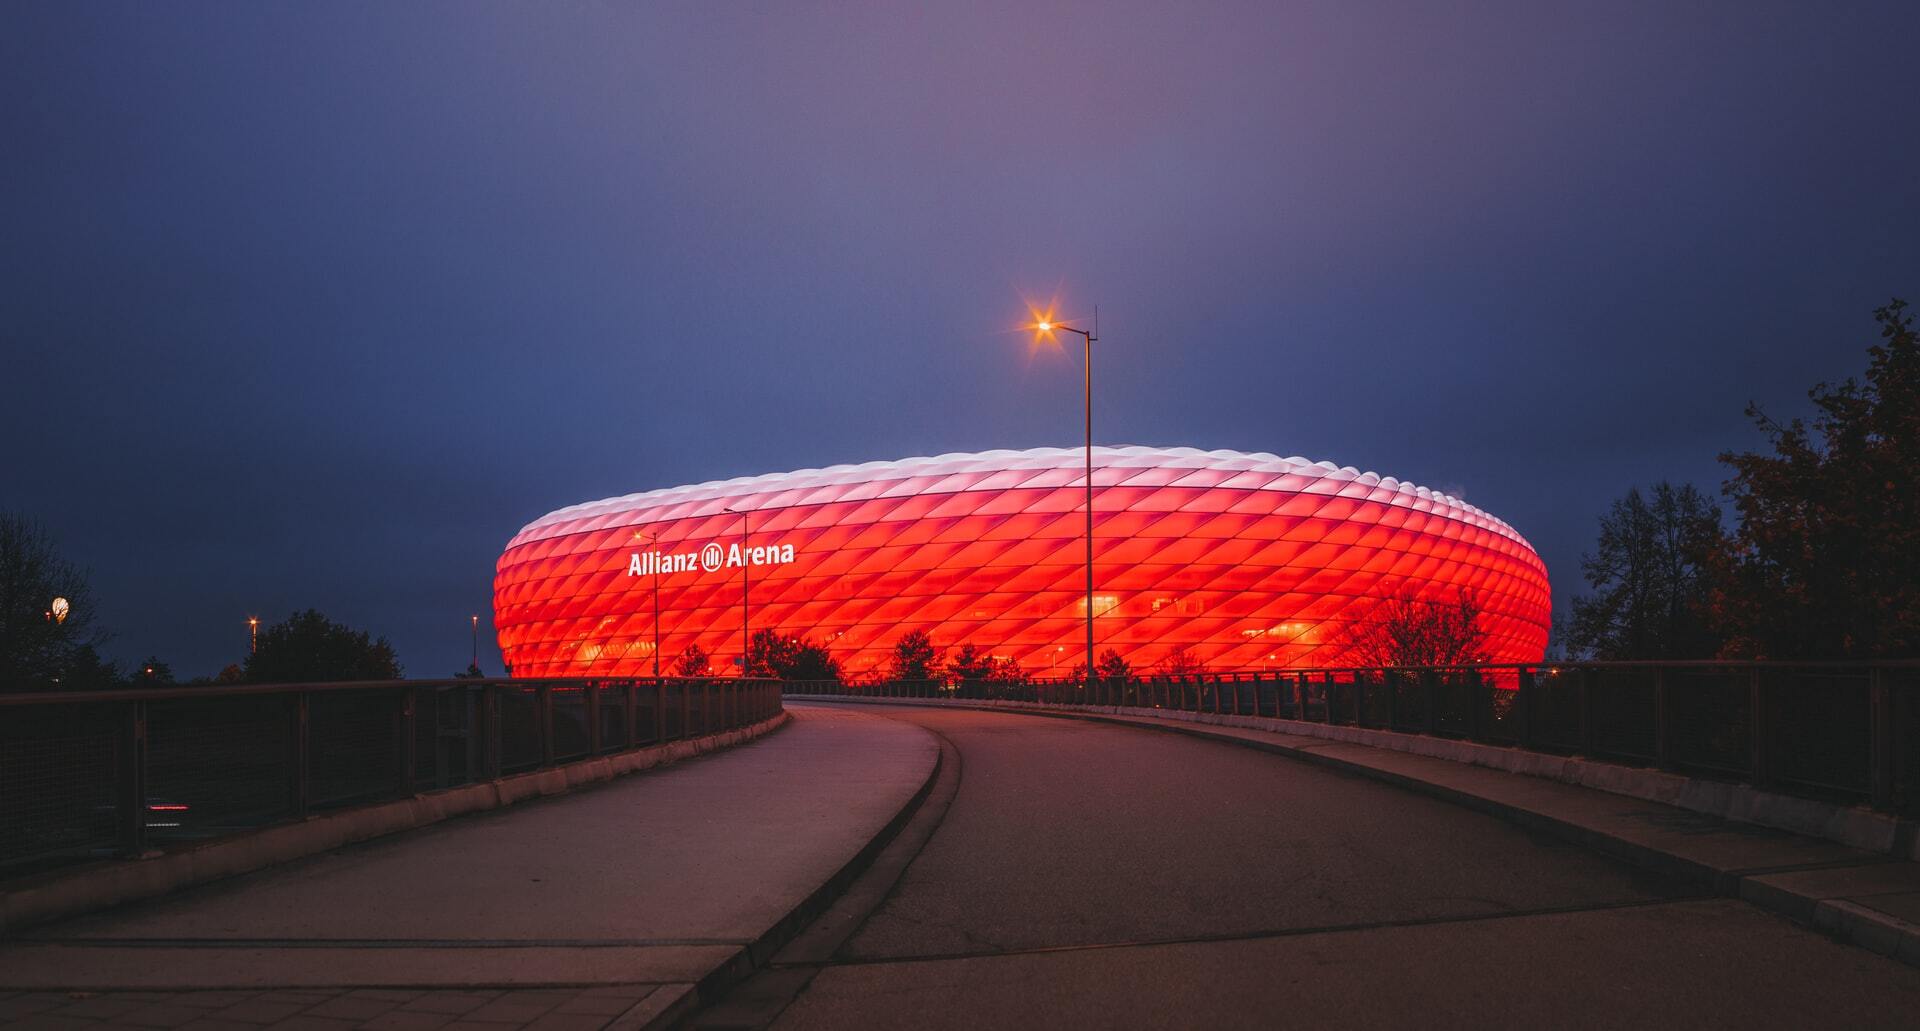 Top 9 Football Stadiums in the World for your Bucket List